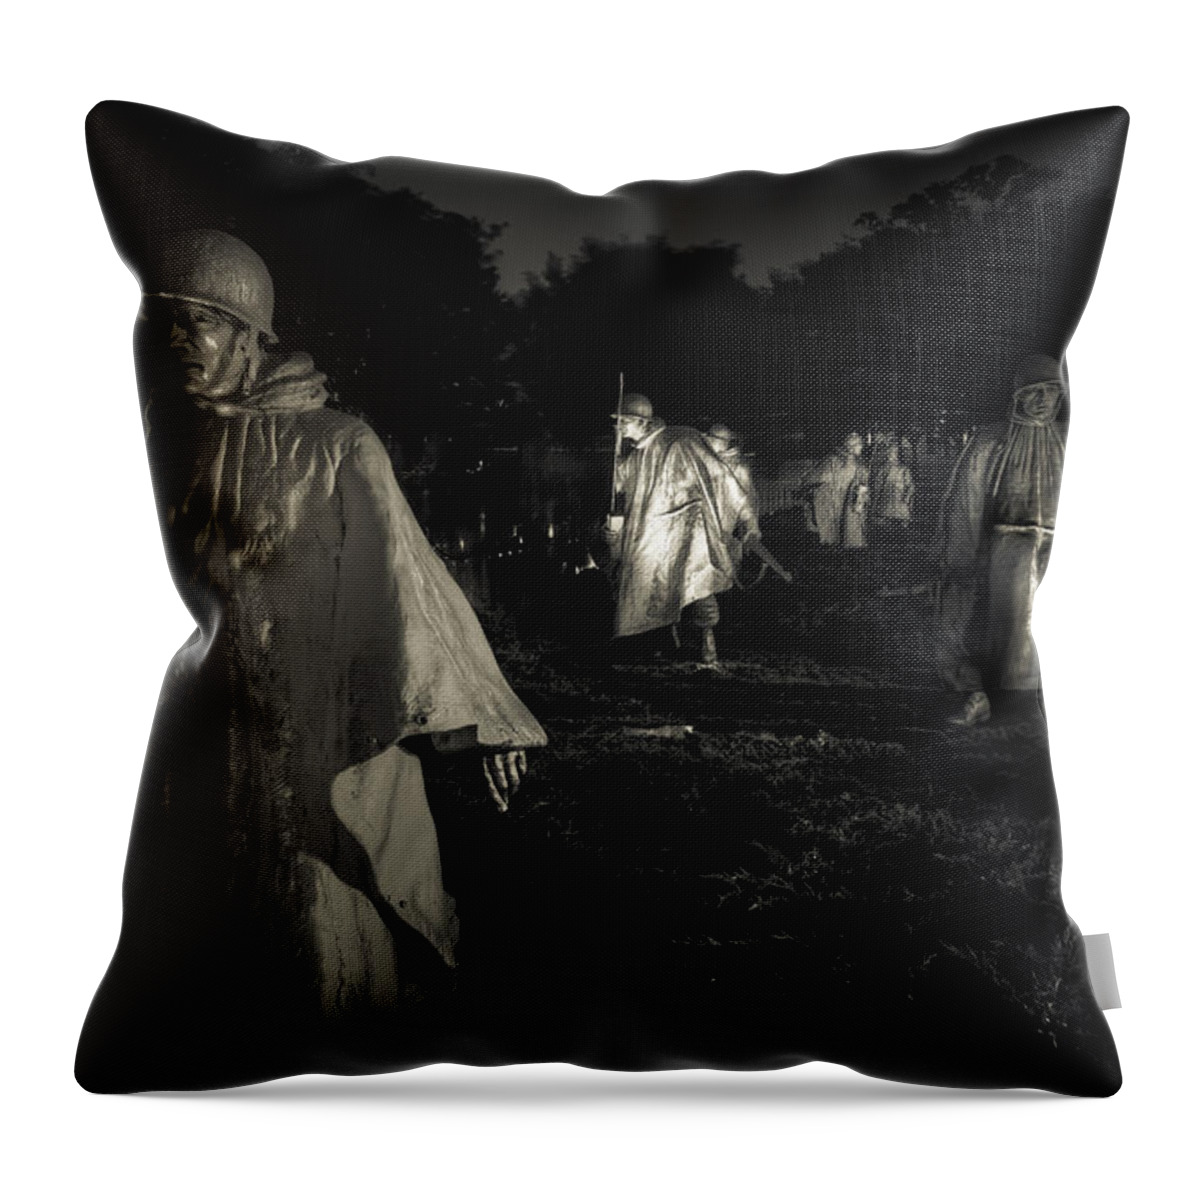 Washington D.c. Throw Pillow featuring the photograph War Ghosts by Tim Stanley